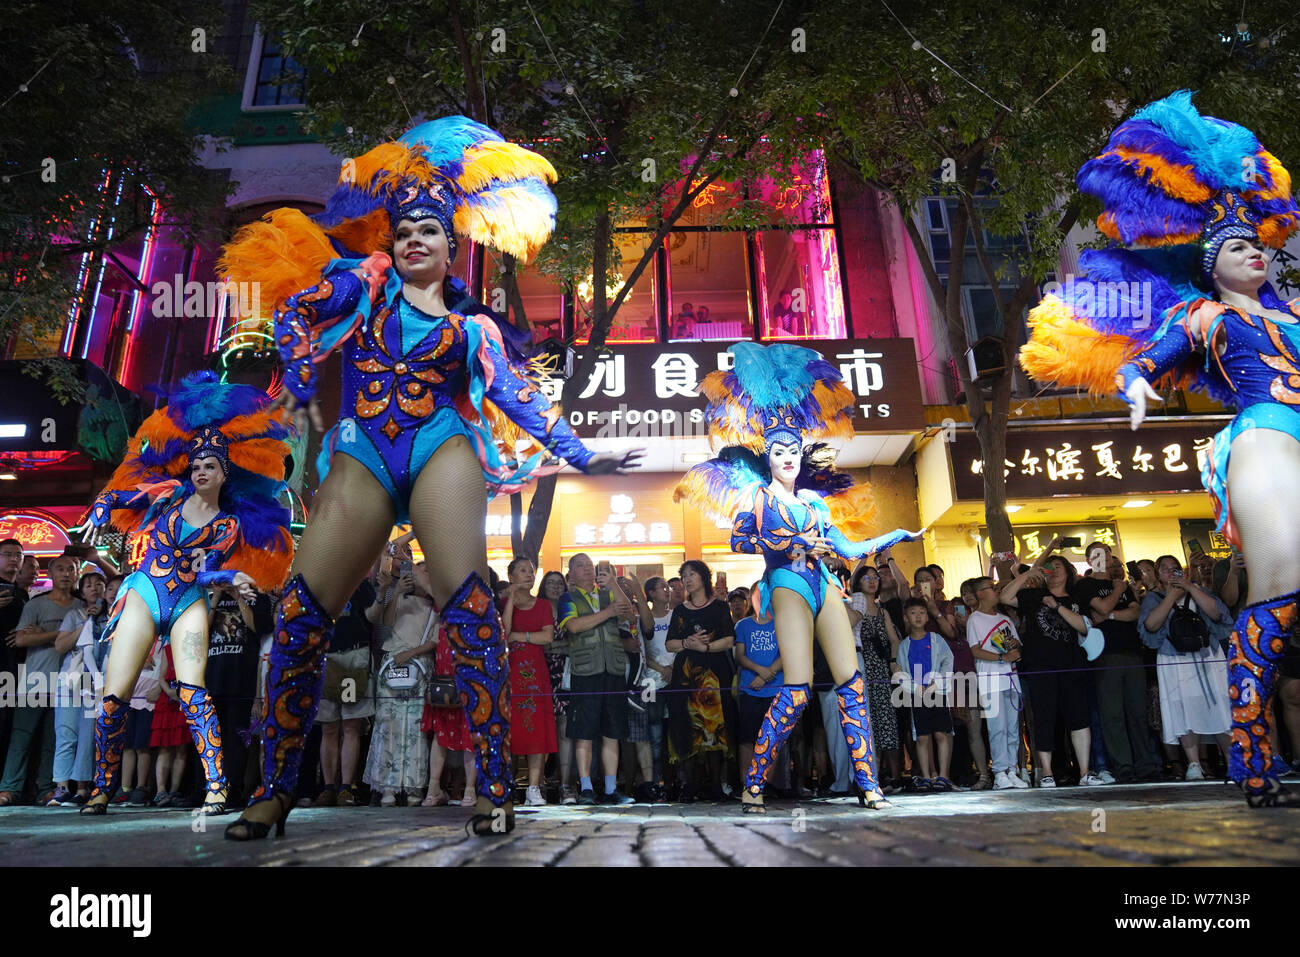 (190805) -- HARBIN, Aug. 5, 2019 (Xinhua) -- Performers are seen on the Central Avenue in Harbin, capital of northeast China's Heilongjiang Province, July 27, 2019. Attracted by the coolness in summer, many tourists come to Harbin for vacation. Meanwhile, Harbin is a city of music for the locals who got in touch with European classical music in an earlier time in China. With the cool summer and rich culture, Harbin received 36.23 million tourists and made revenue of 60.7 billion yuan (8.6 billion U.S. dollars) in the summer of 2018. (Xinhua/Wang Jianwei) Stock Photo